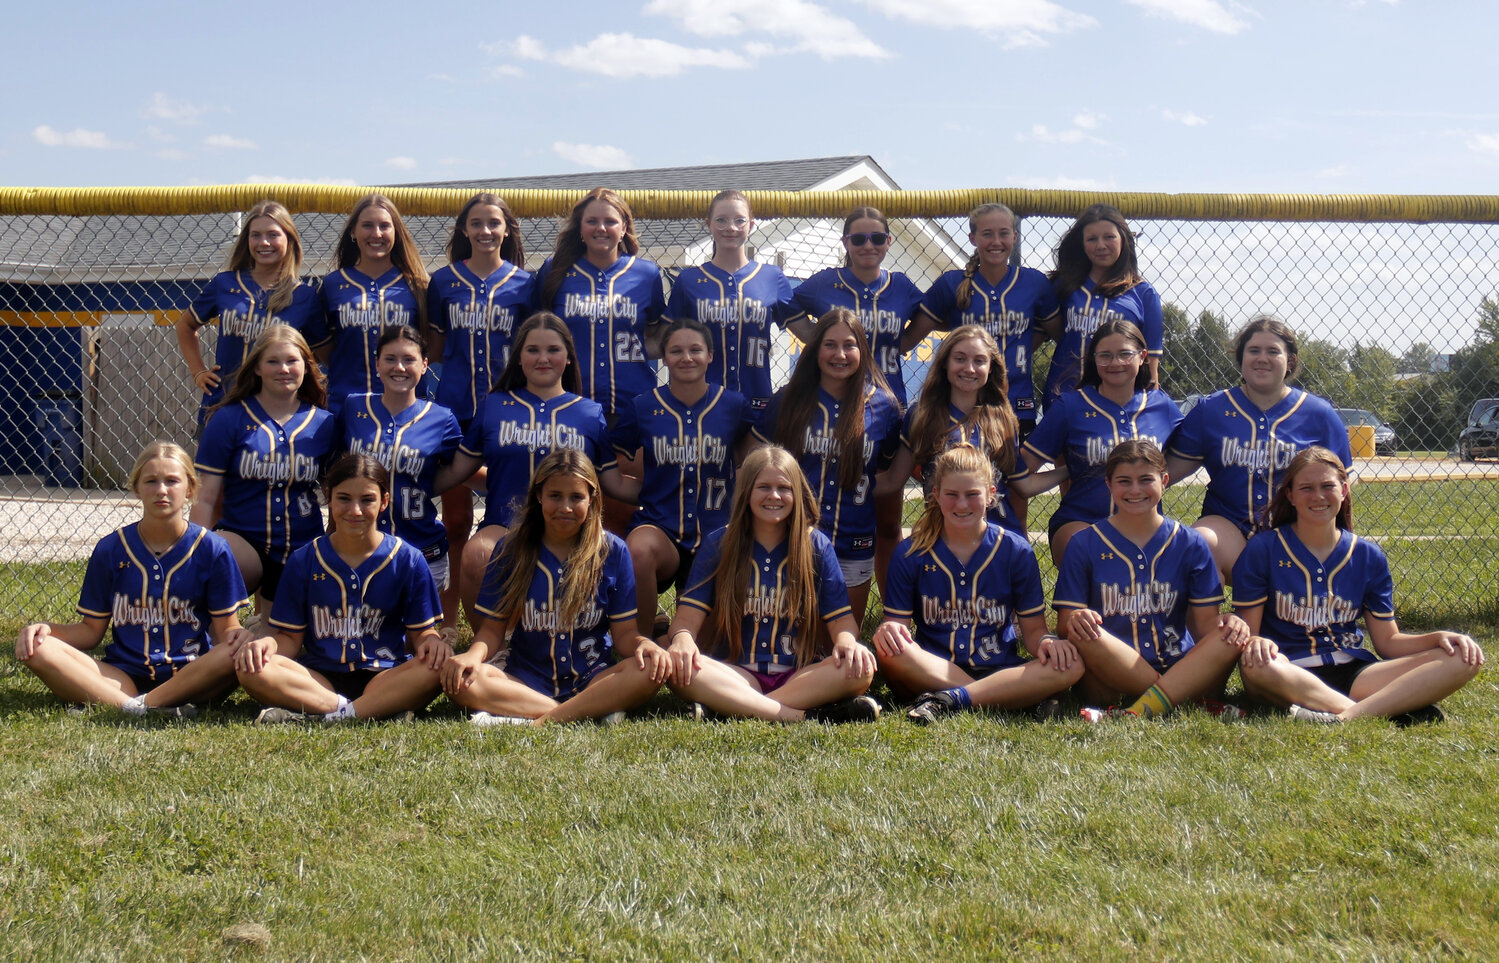 Members of the Wright City softball team are front row, from left: Shaylynne Bote, Avery Meier, Cheyenne Mayes, Karlee Franklin, Sadie Sehnert, Sara Sehnert, Emma Manner. Second row, from left: Torrie Perry, Bailey Love. Aariah Robertson, Lydia Clubb, Lillian Brown, Alana Head, Ava Swaringen, Hailey Swor. Back row, from left: Tristyn Moore, Emma Staats, Sophia Wegrzyn, Jolee Lockhart, Camille Gardner, Paige Rees, Allison Thomas.